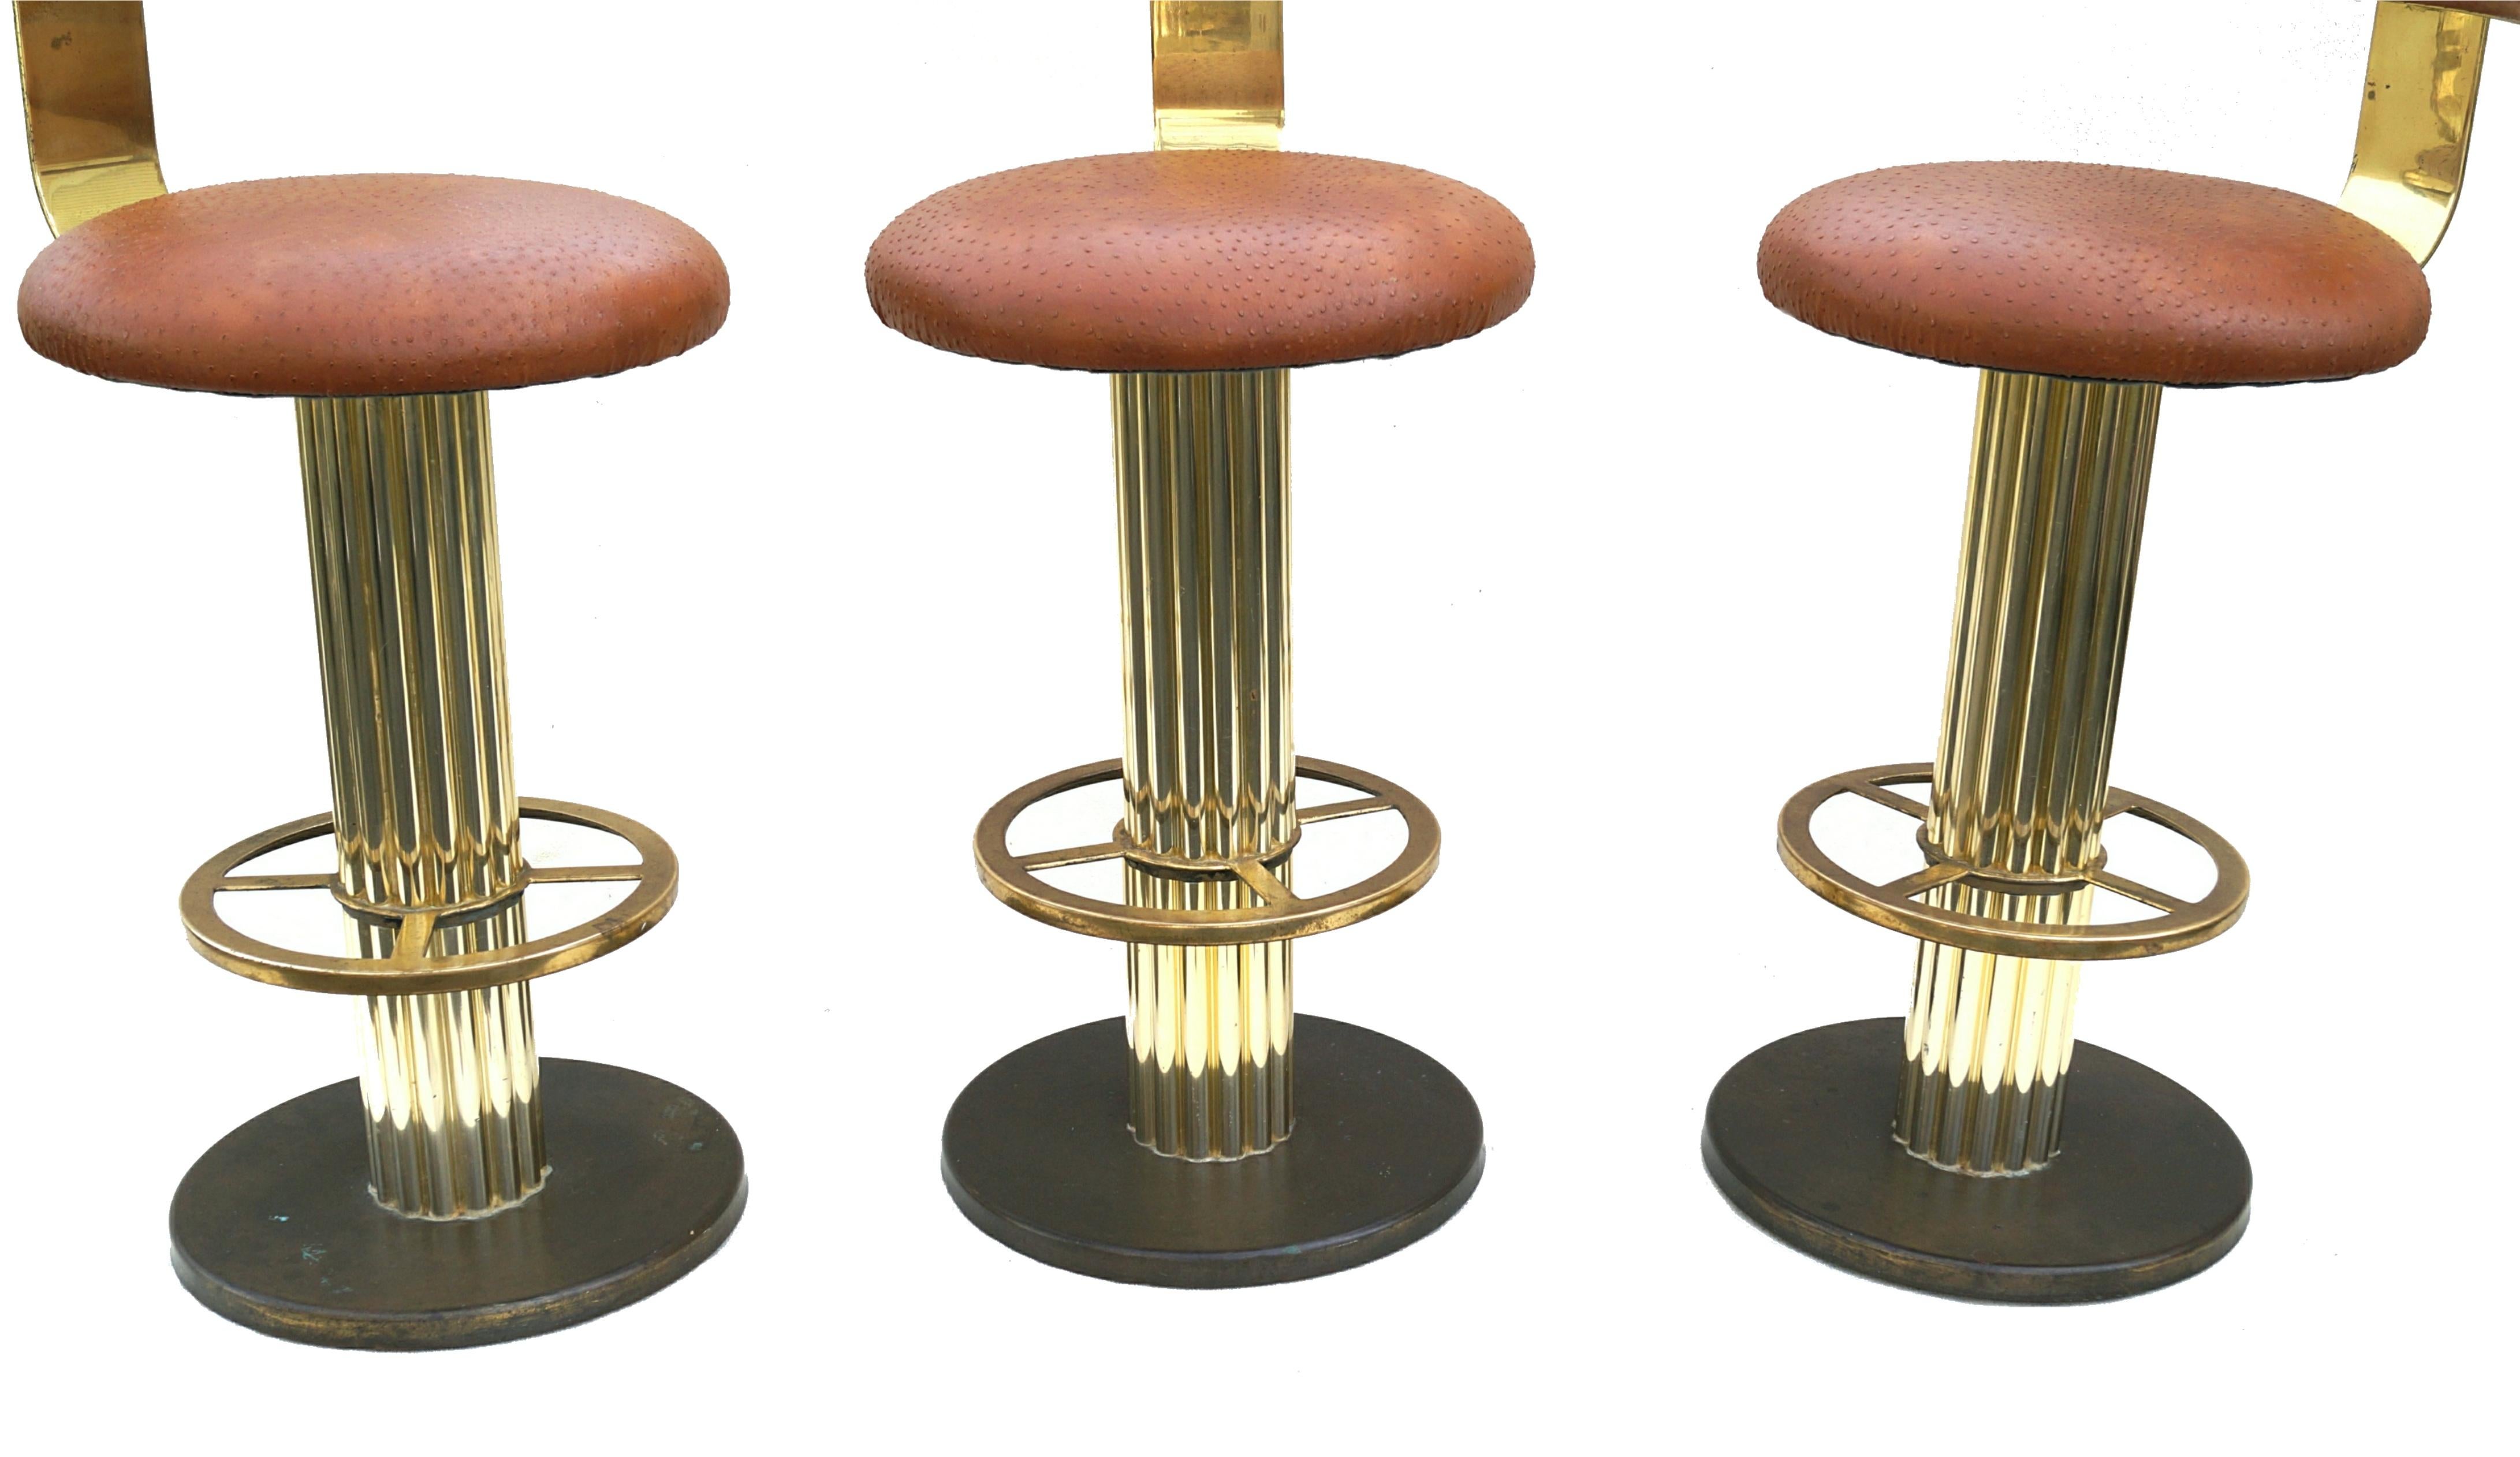 American Modern Design For Leisure Ostrich Brass Bar Stools Set of 3 Barstool For Sale